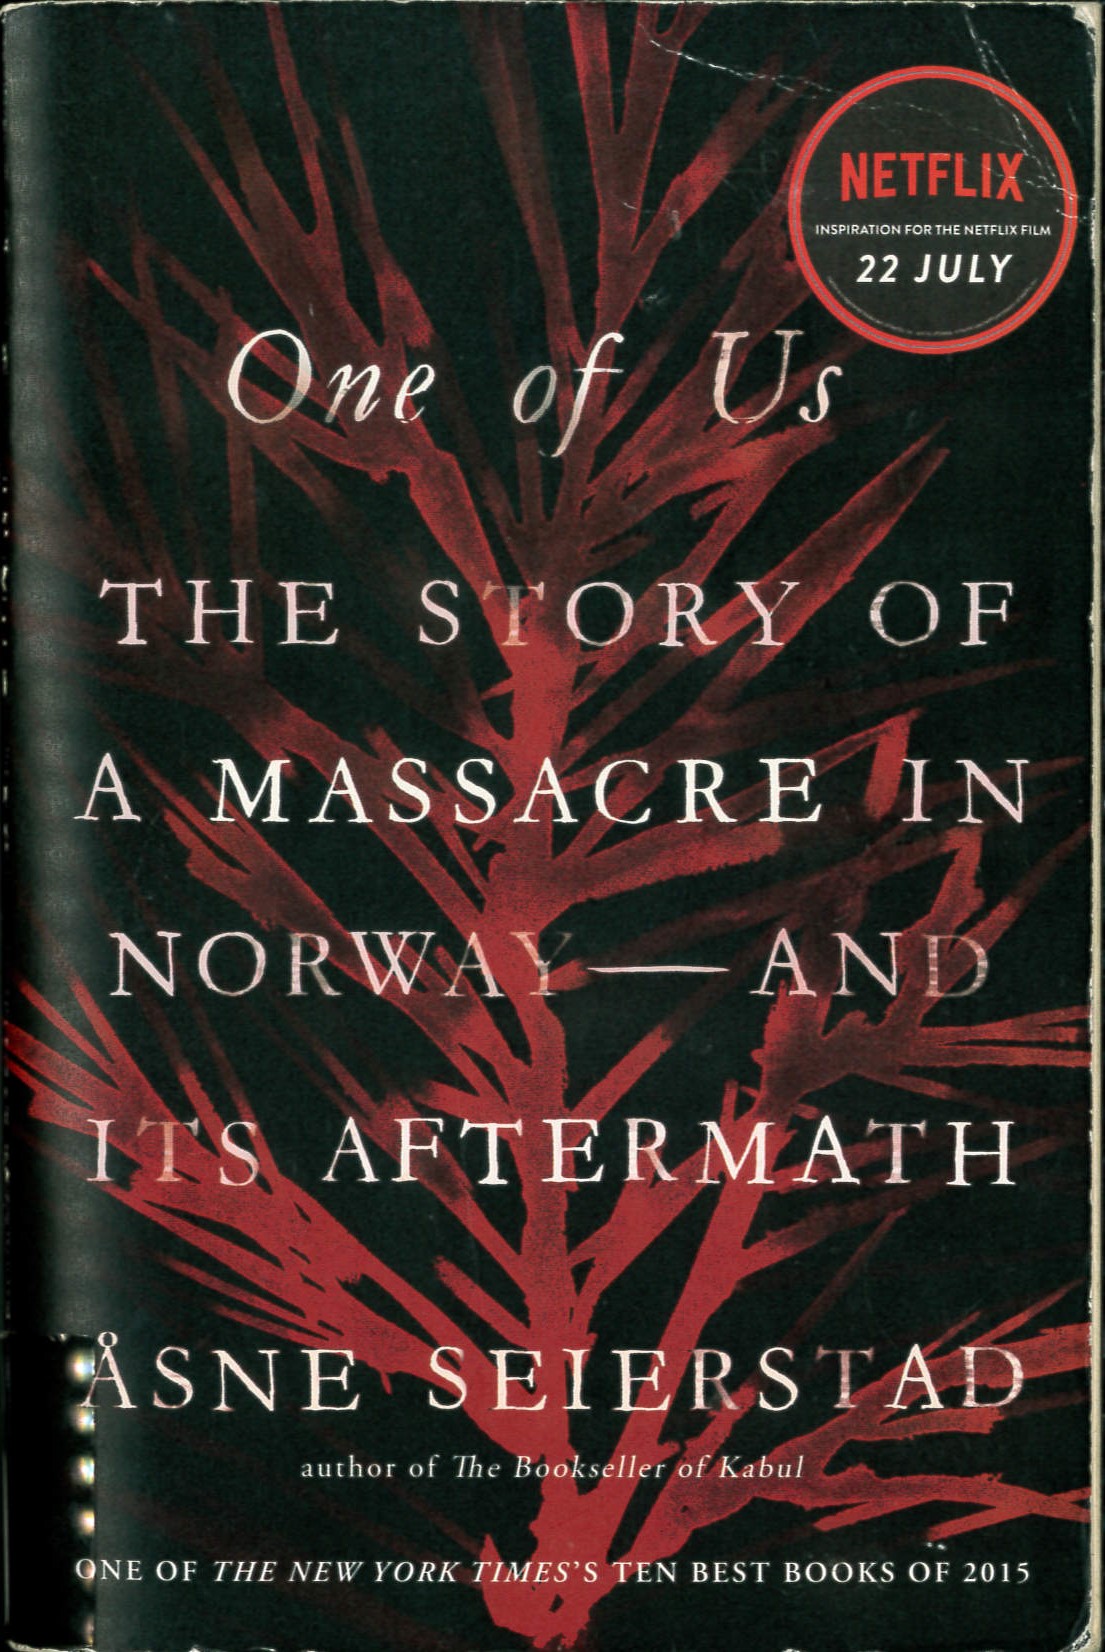 One of us the story of a Massacre in Norway -- and its aftermath